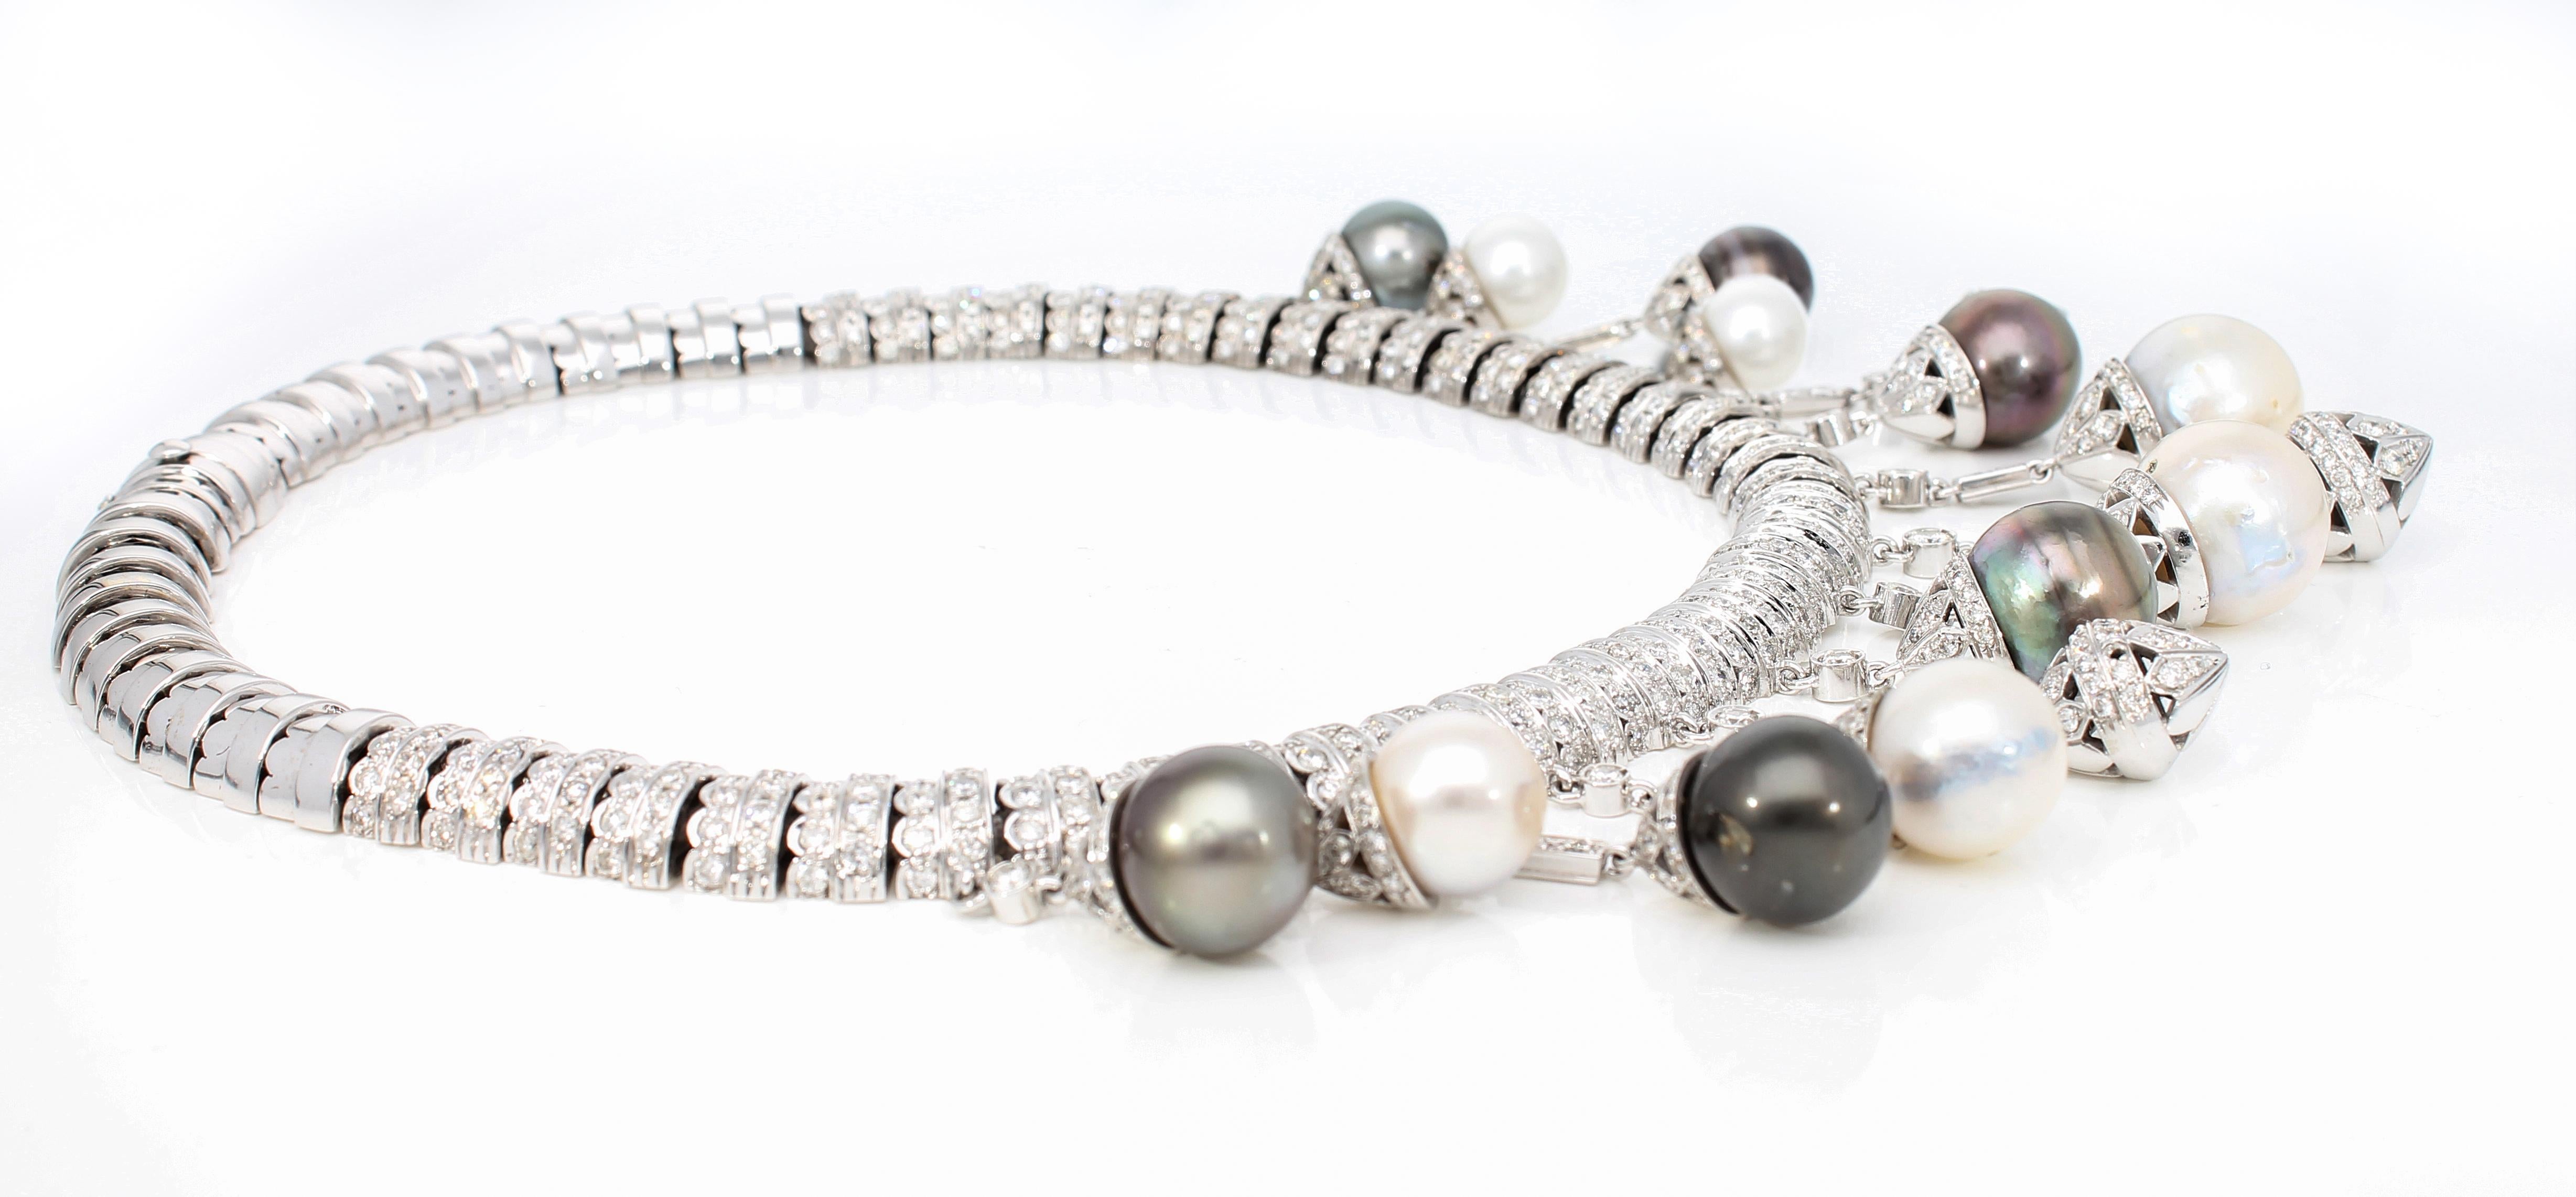 Necklace White Gold and Diamonds, Pendants with White and Black Pearls S.S. For Sale 11